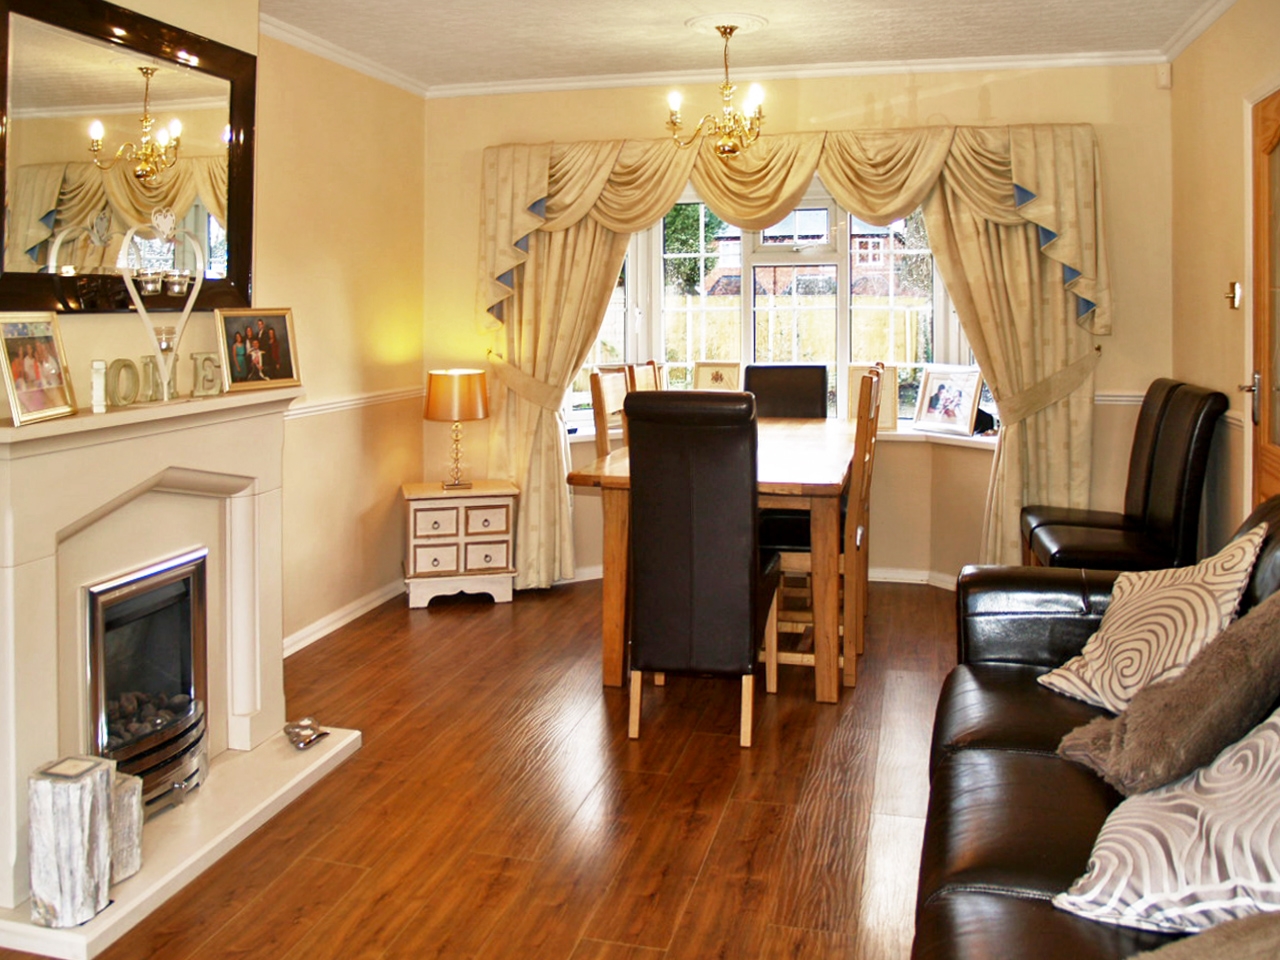 4 bedroom detached house SSTC in Solihull - photograph 7.